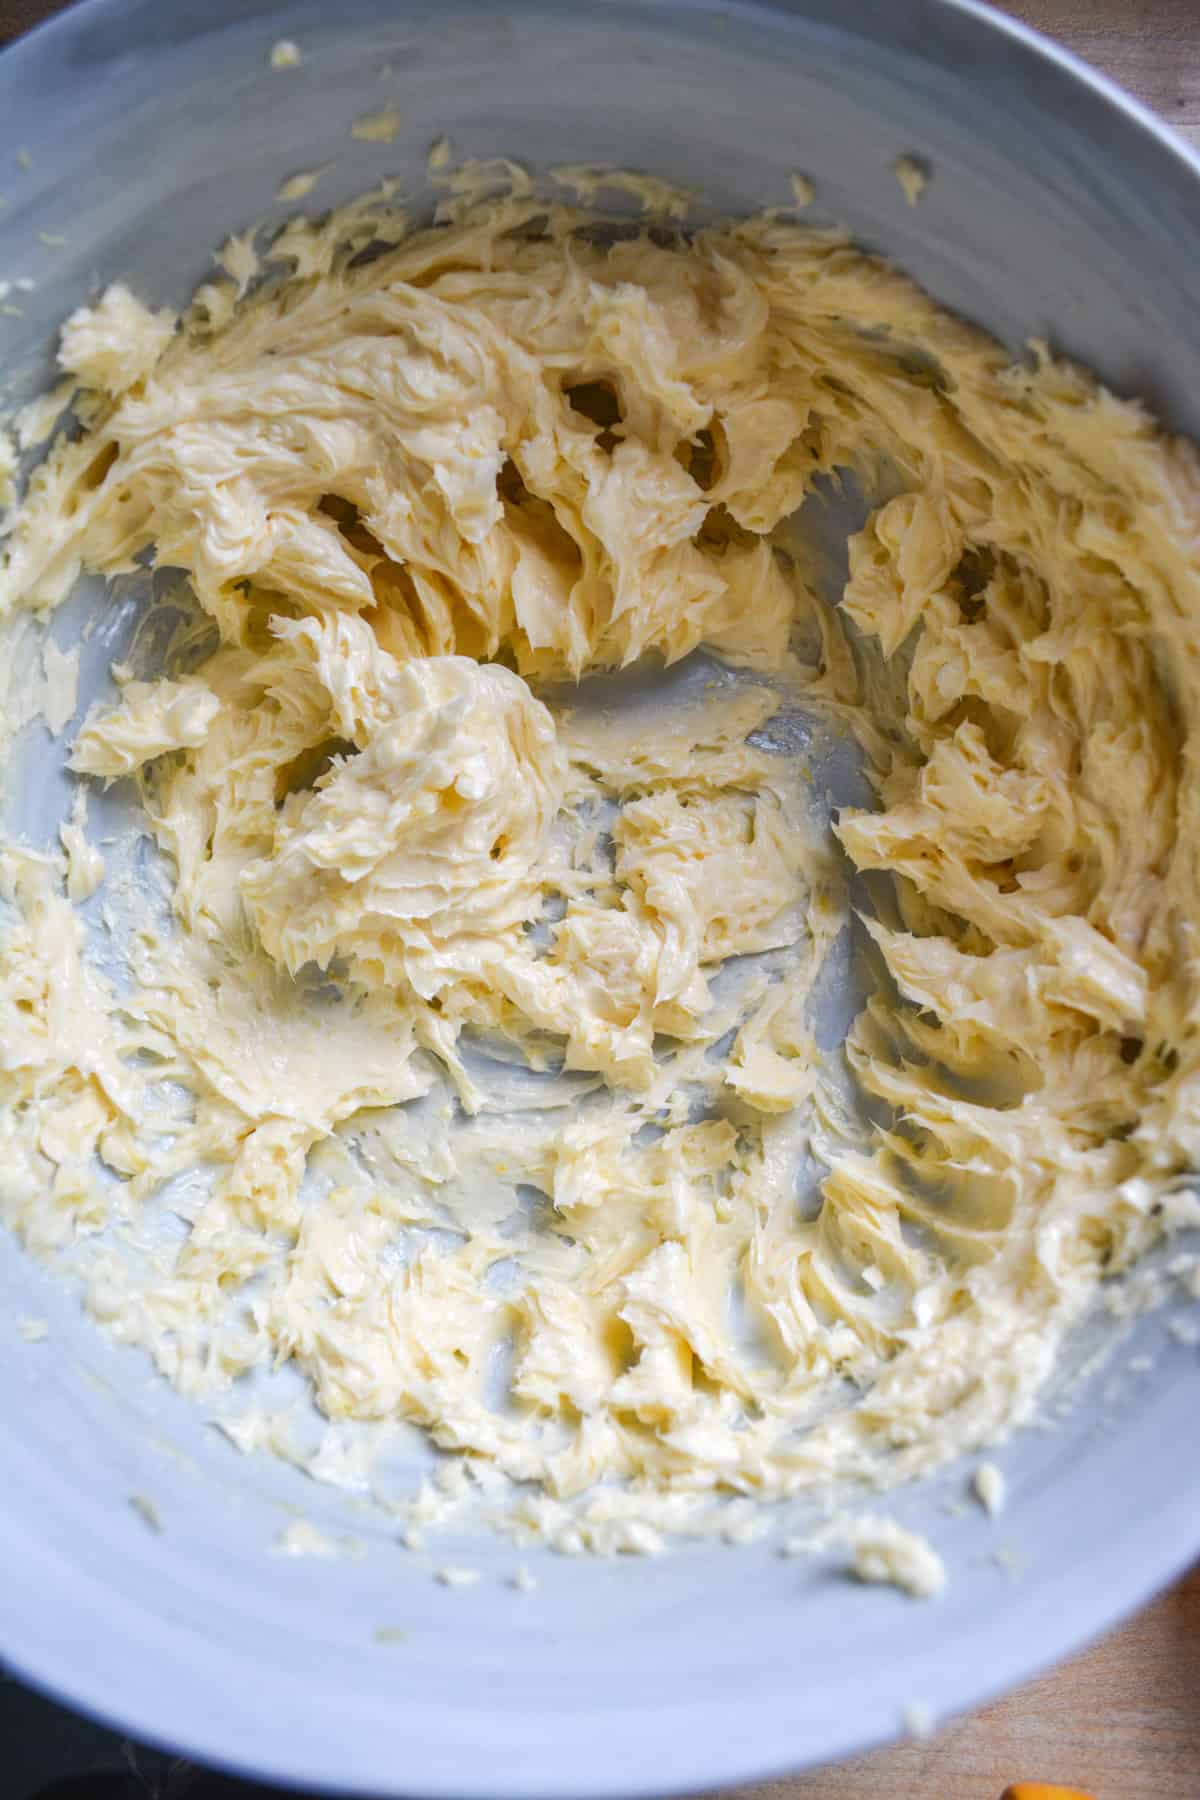 Vegan butter creamed in a large mixing bowl.